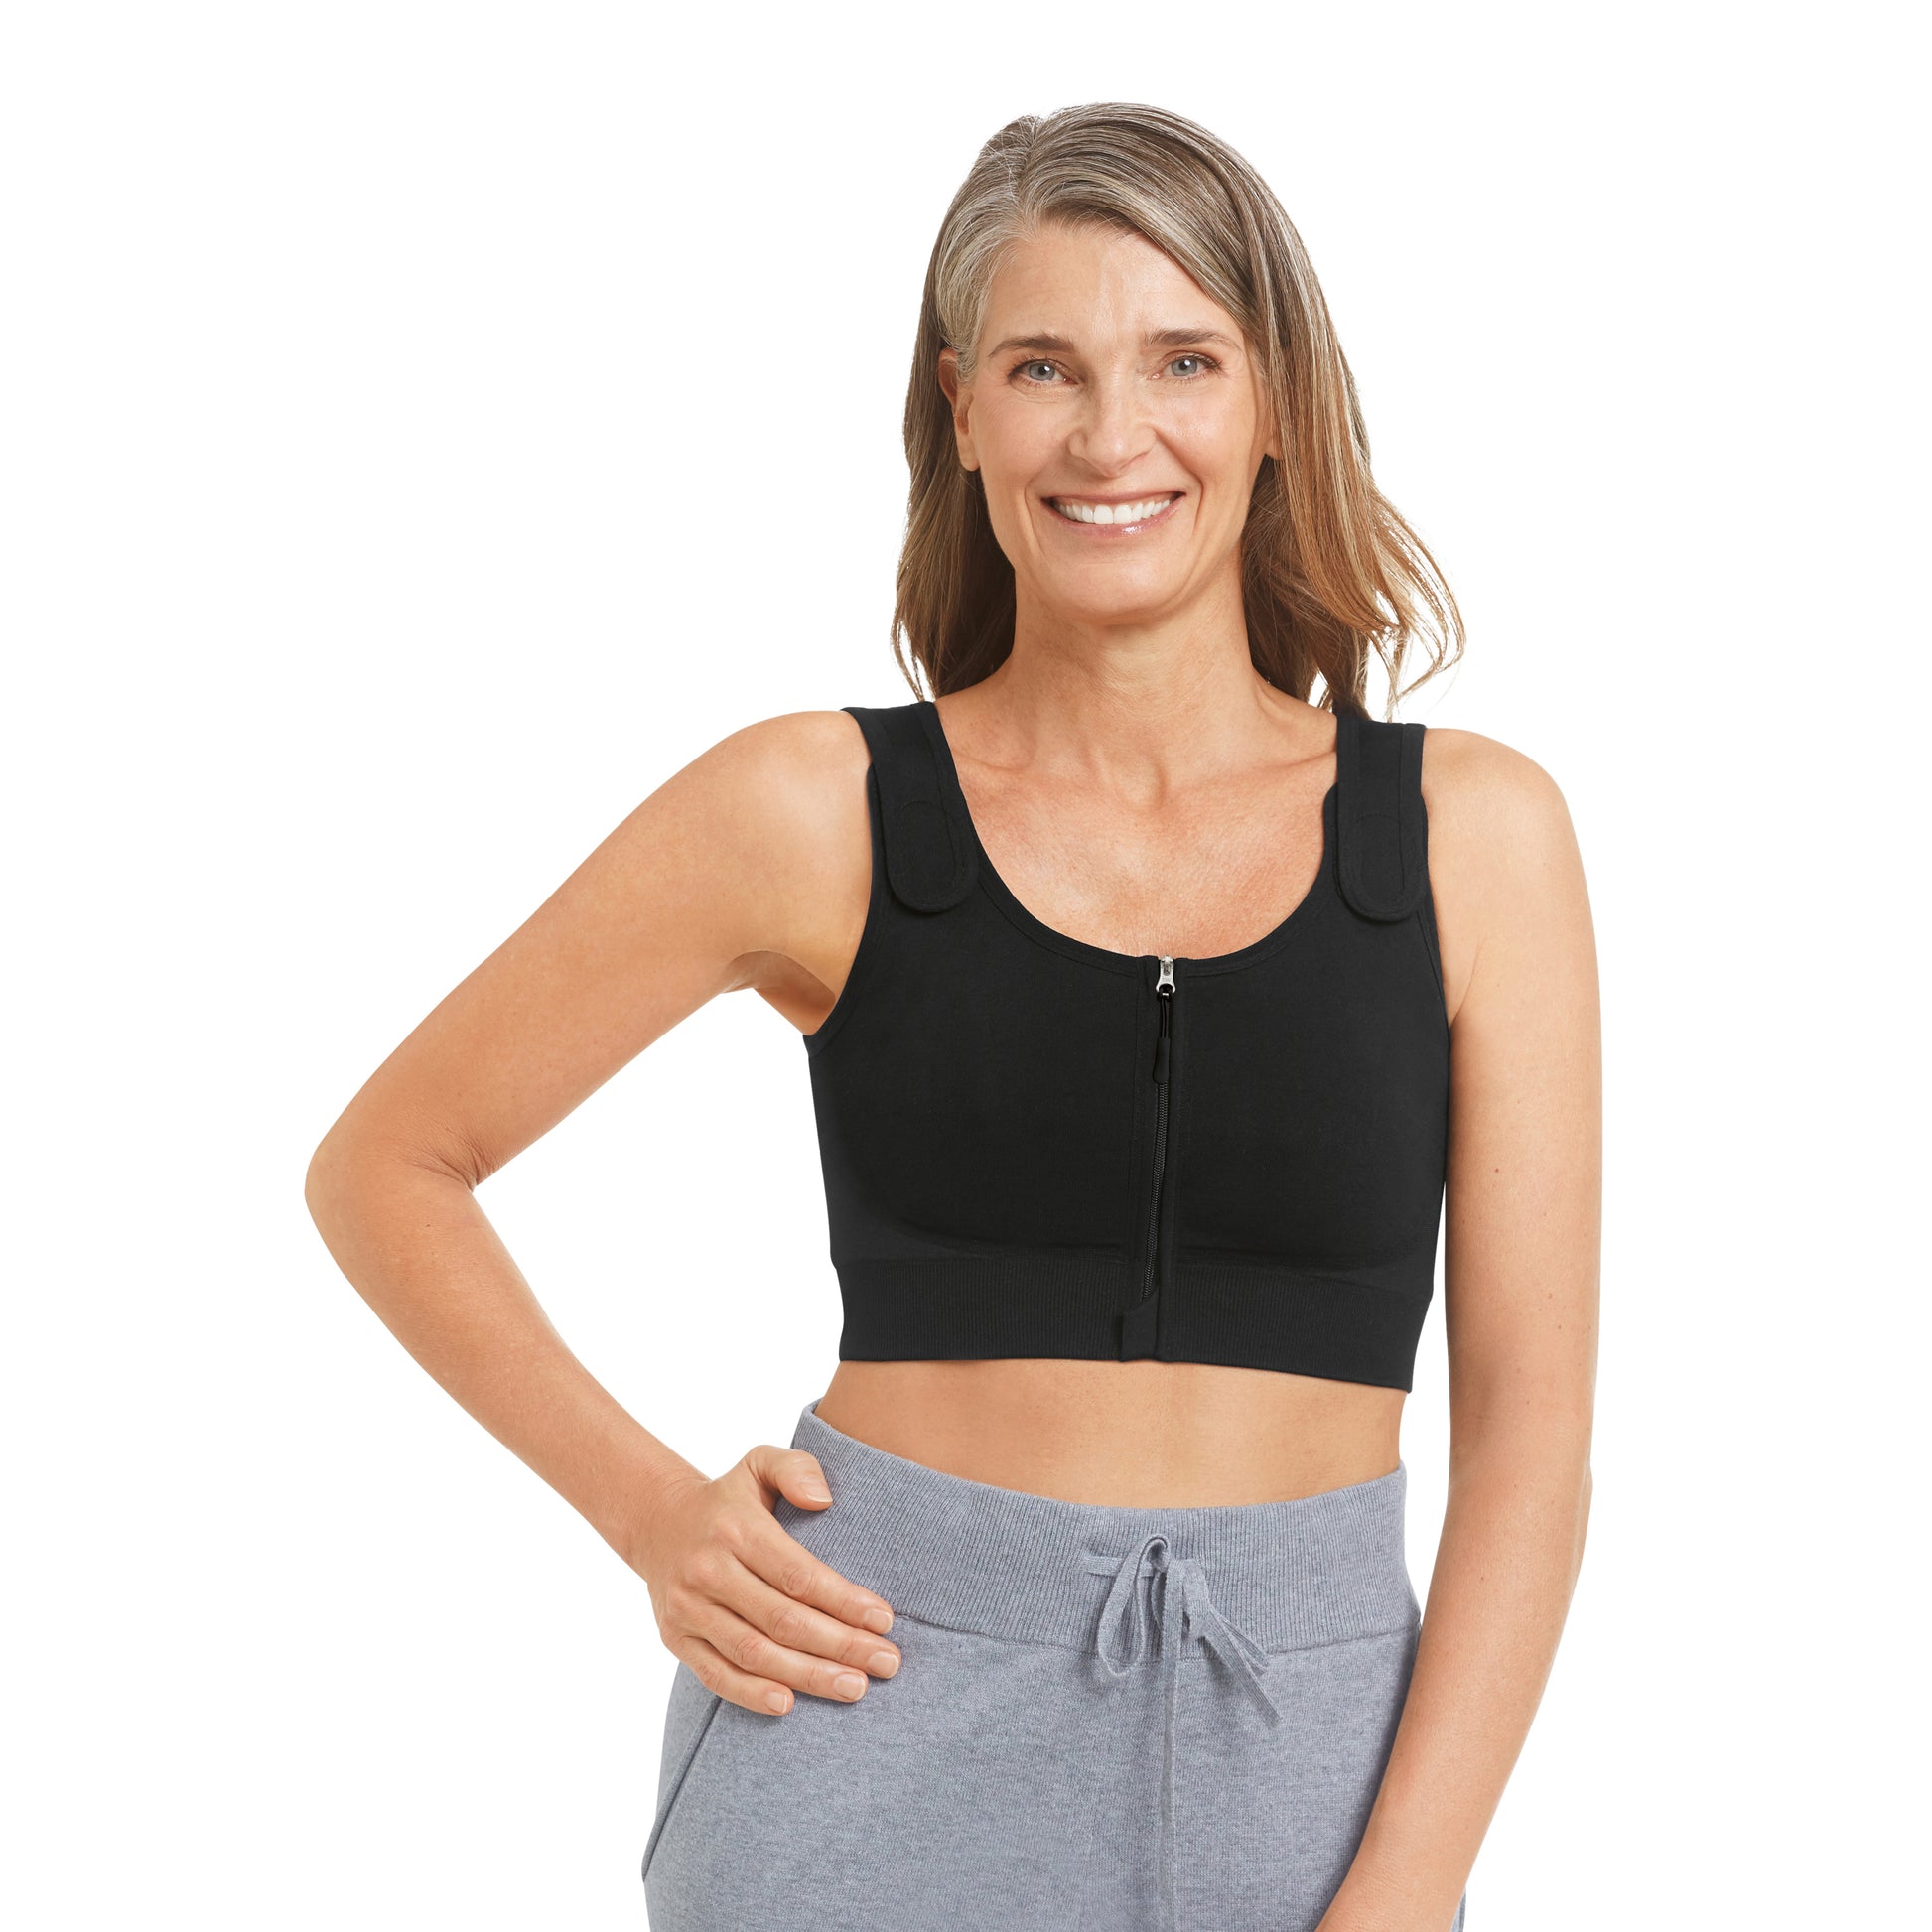 Bianca Seamless Post-Op Bra: Experience Comfort and Support